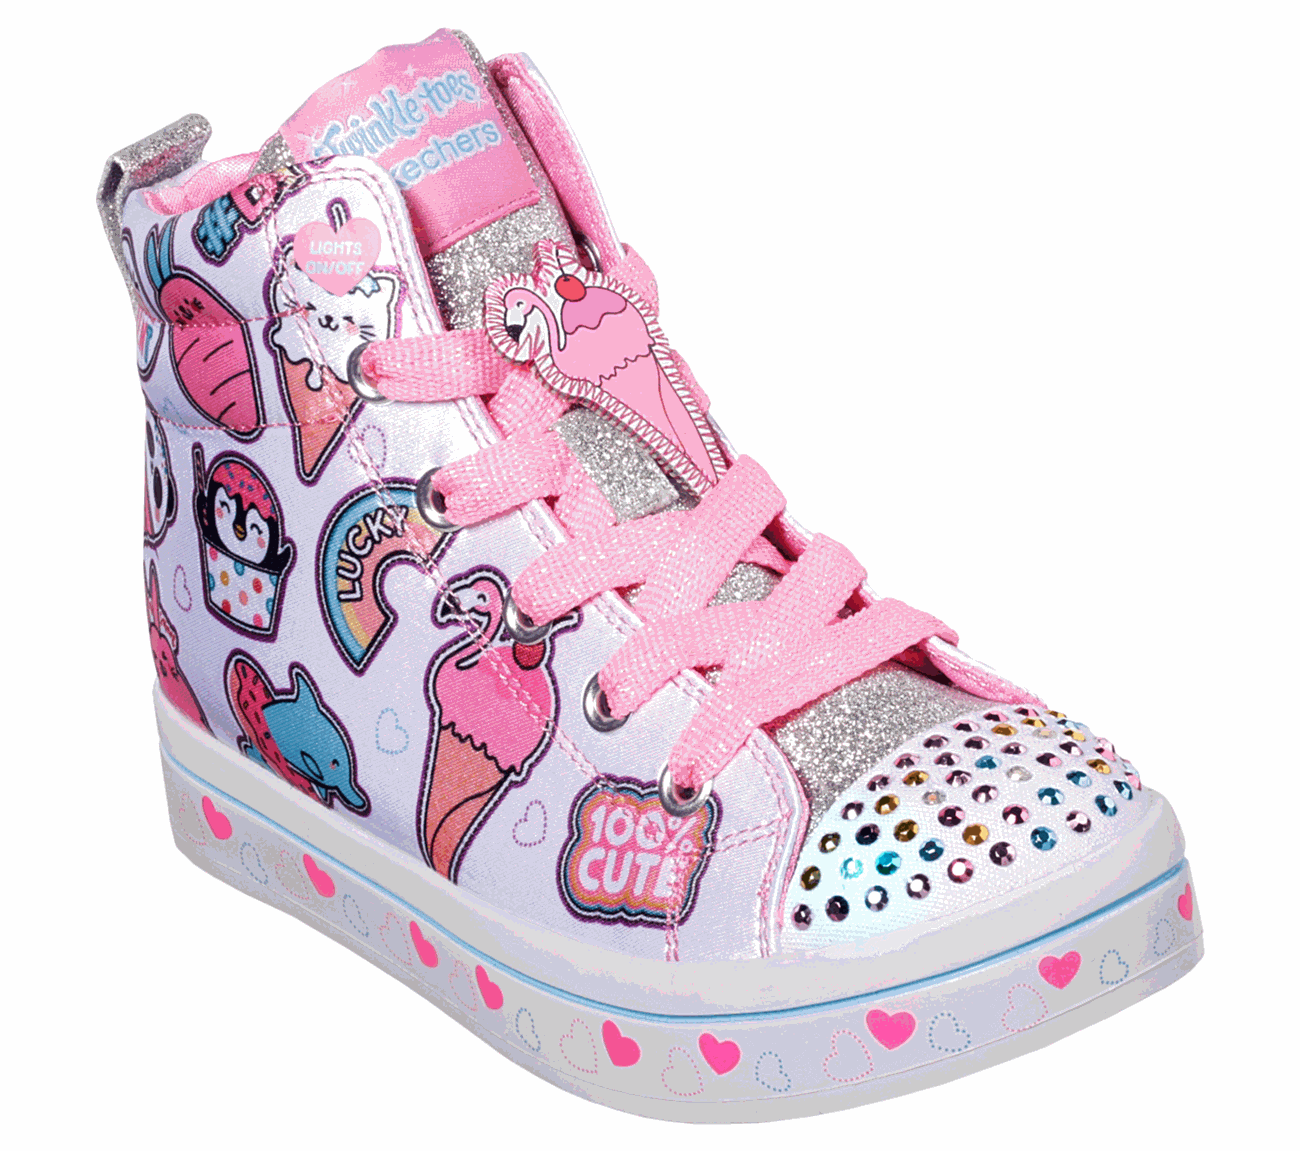 Buy SKECHERS Twinkle Toes: Twi-Lites - Character Sweets S-Lights Shoes